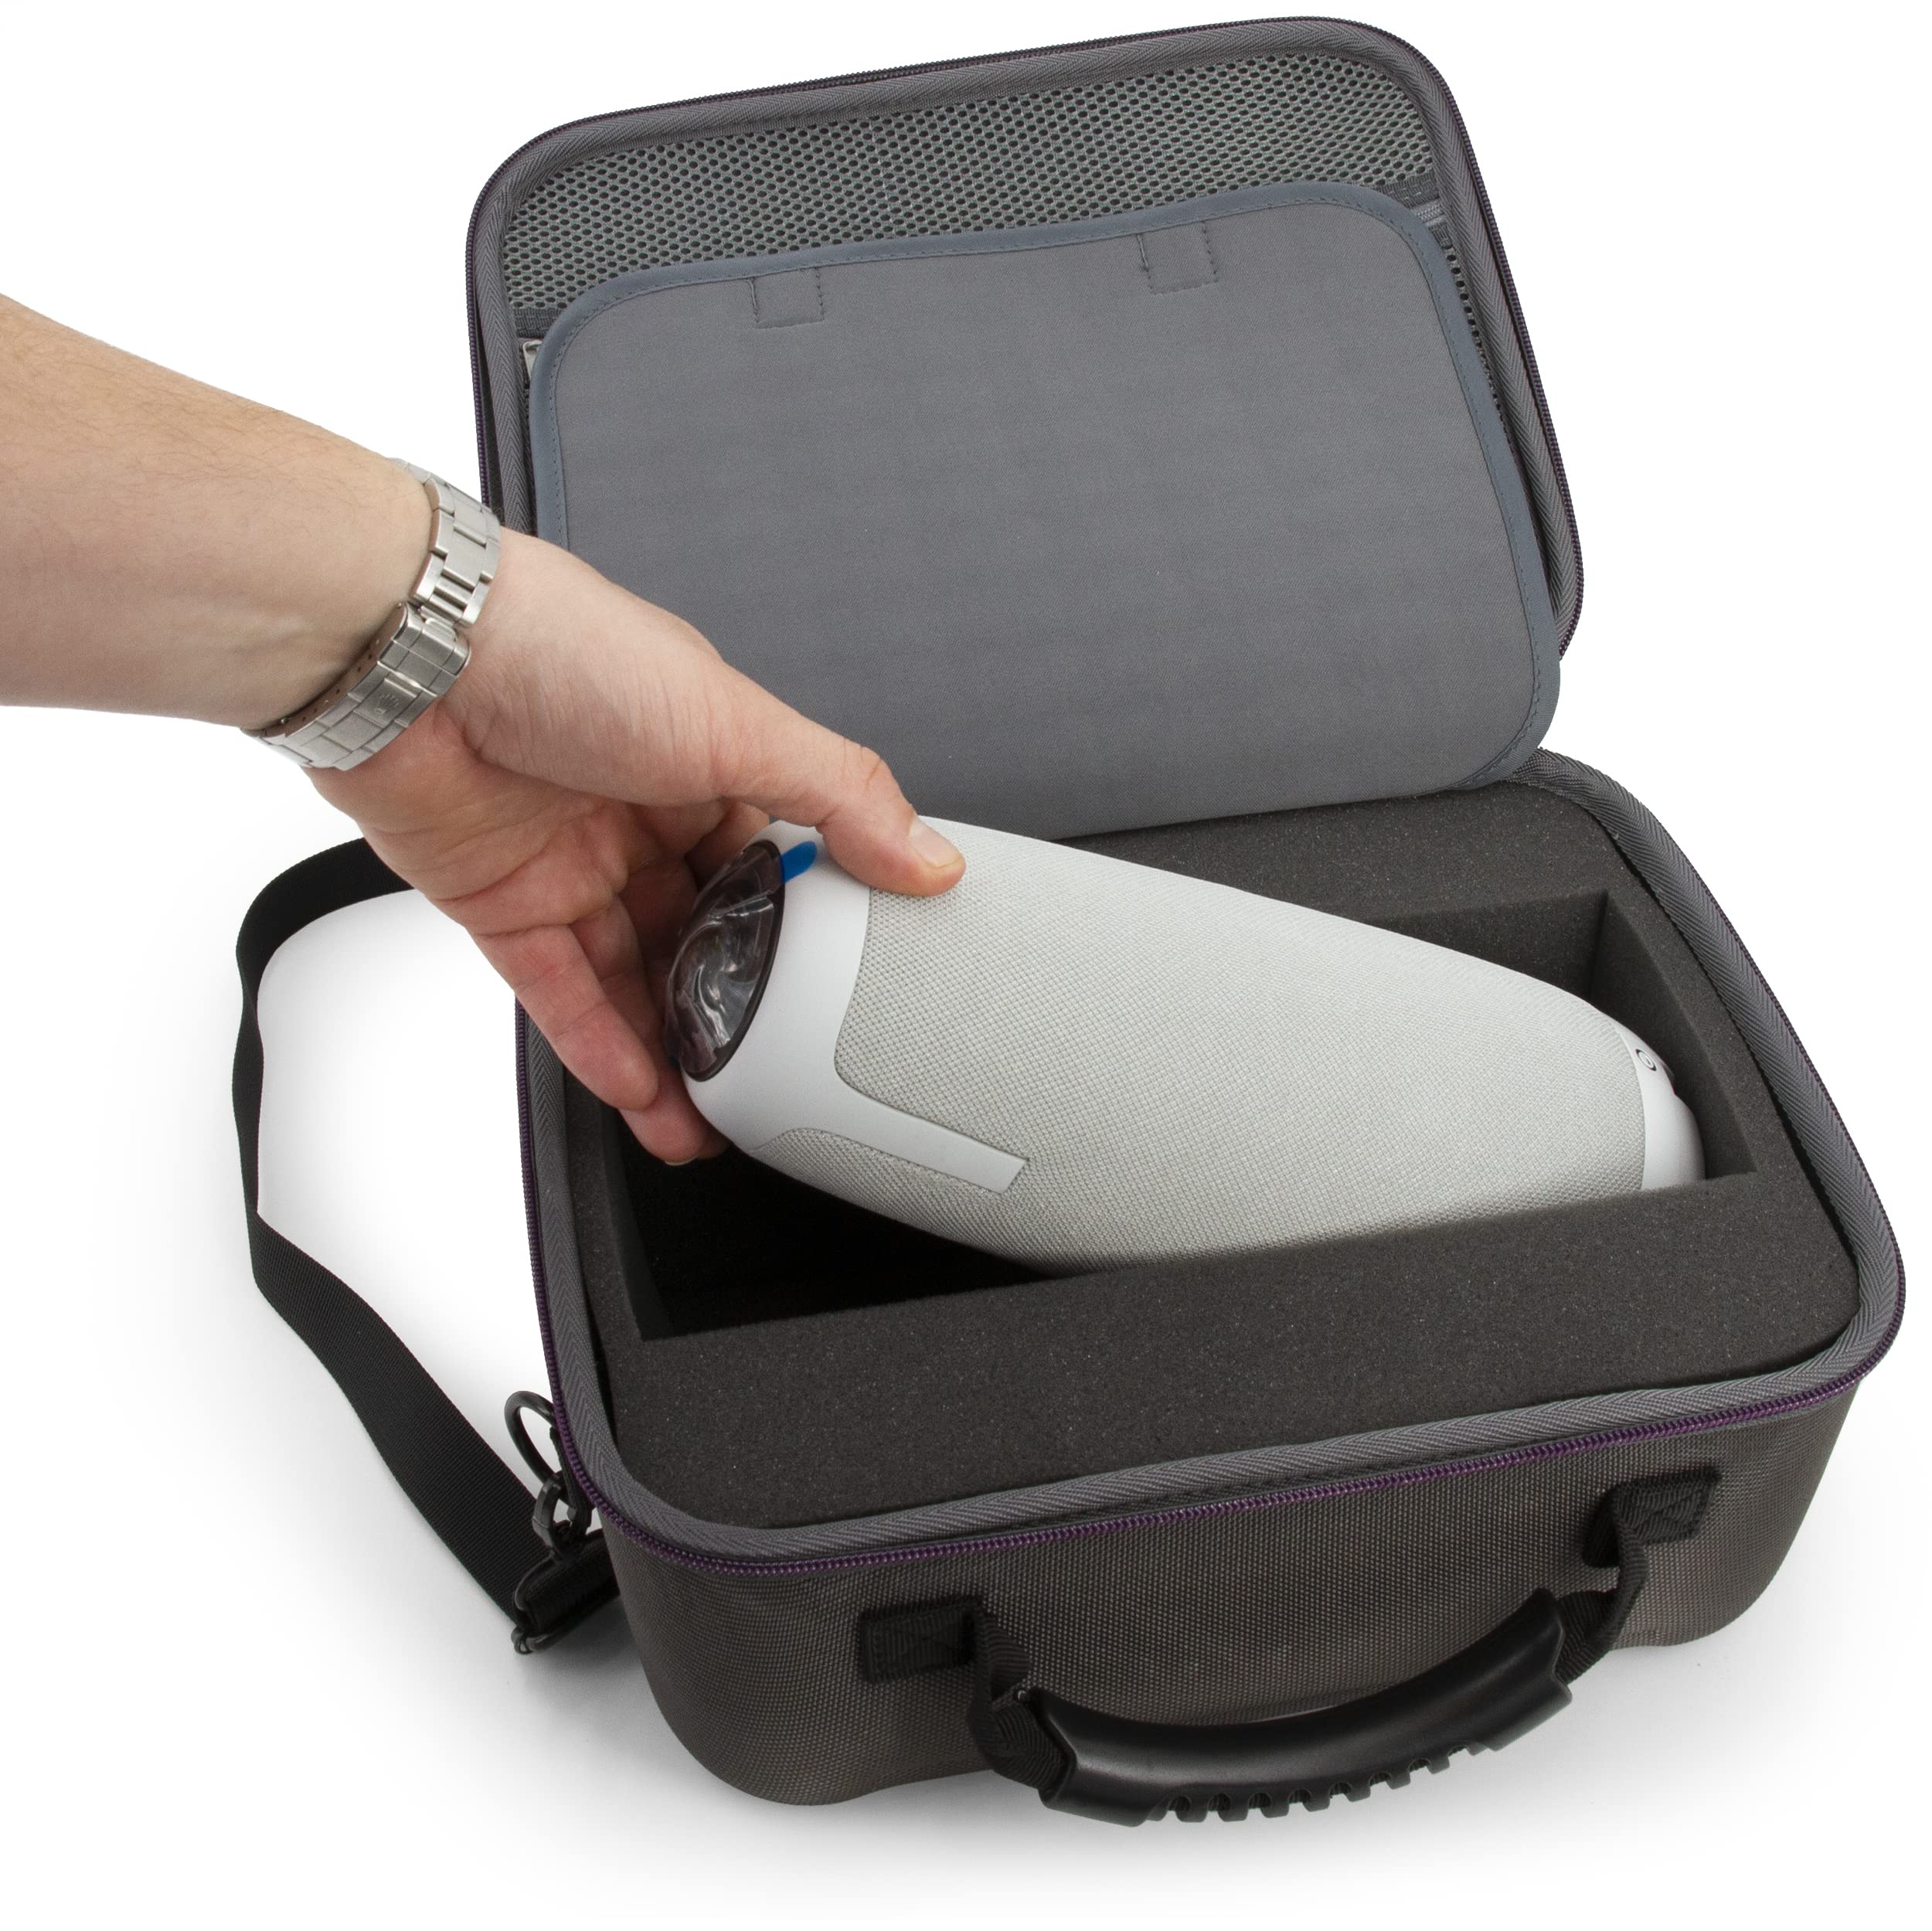 CASEMATIX Carrying Case Compatible With Meeting Owl Pro and Owl Camera 360 Video Conference Room Accessories